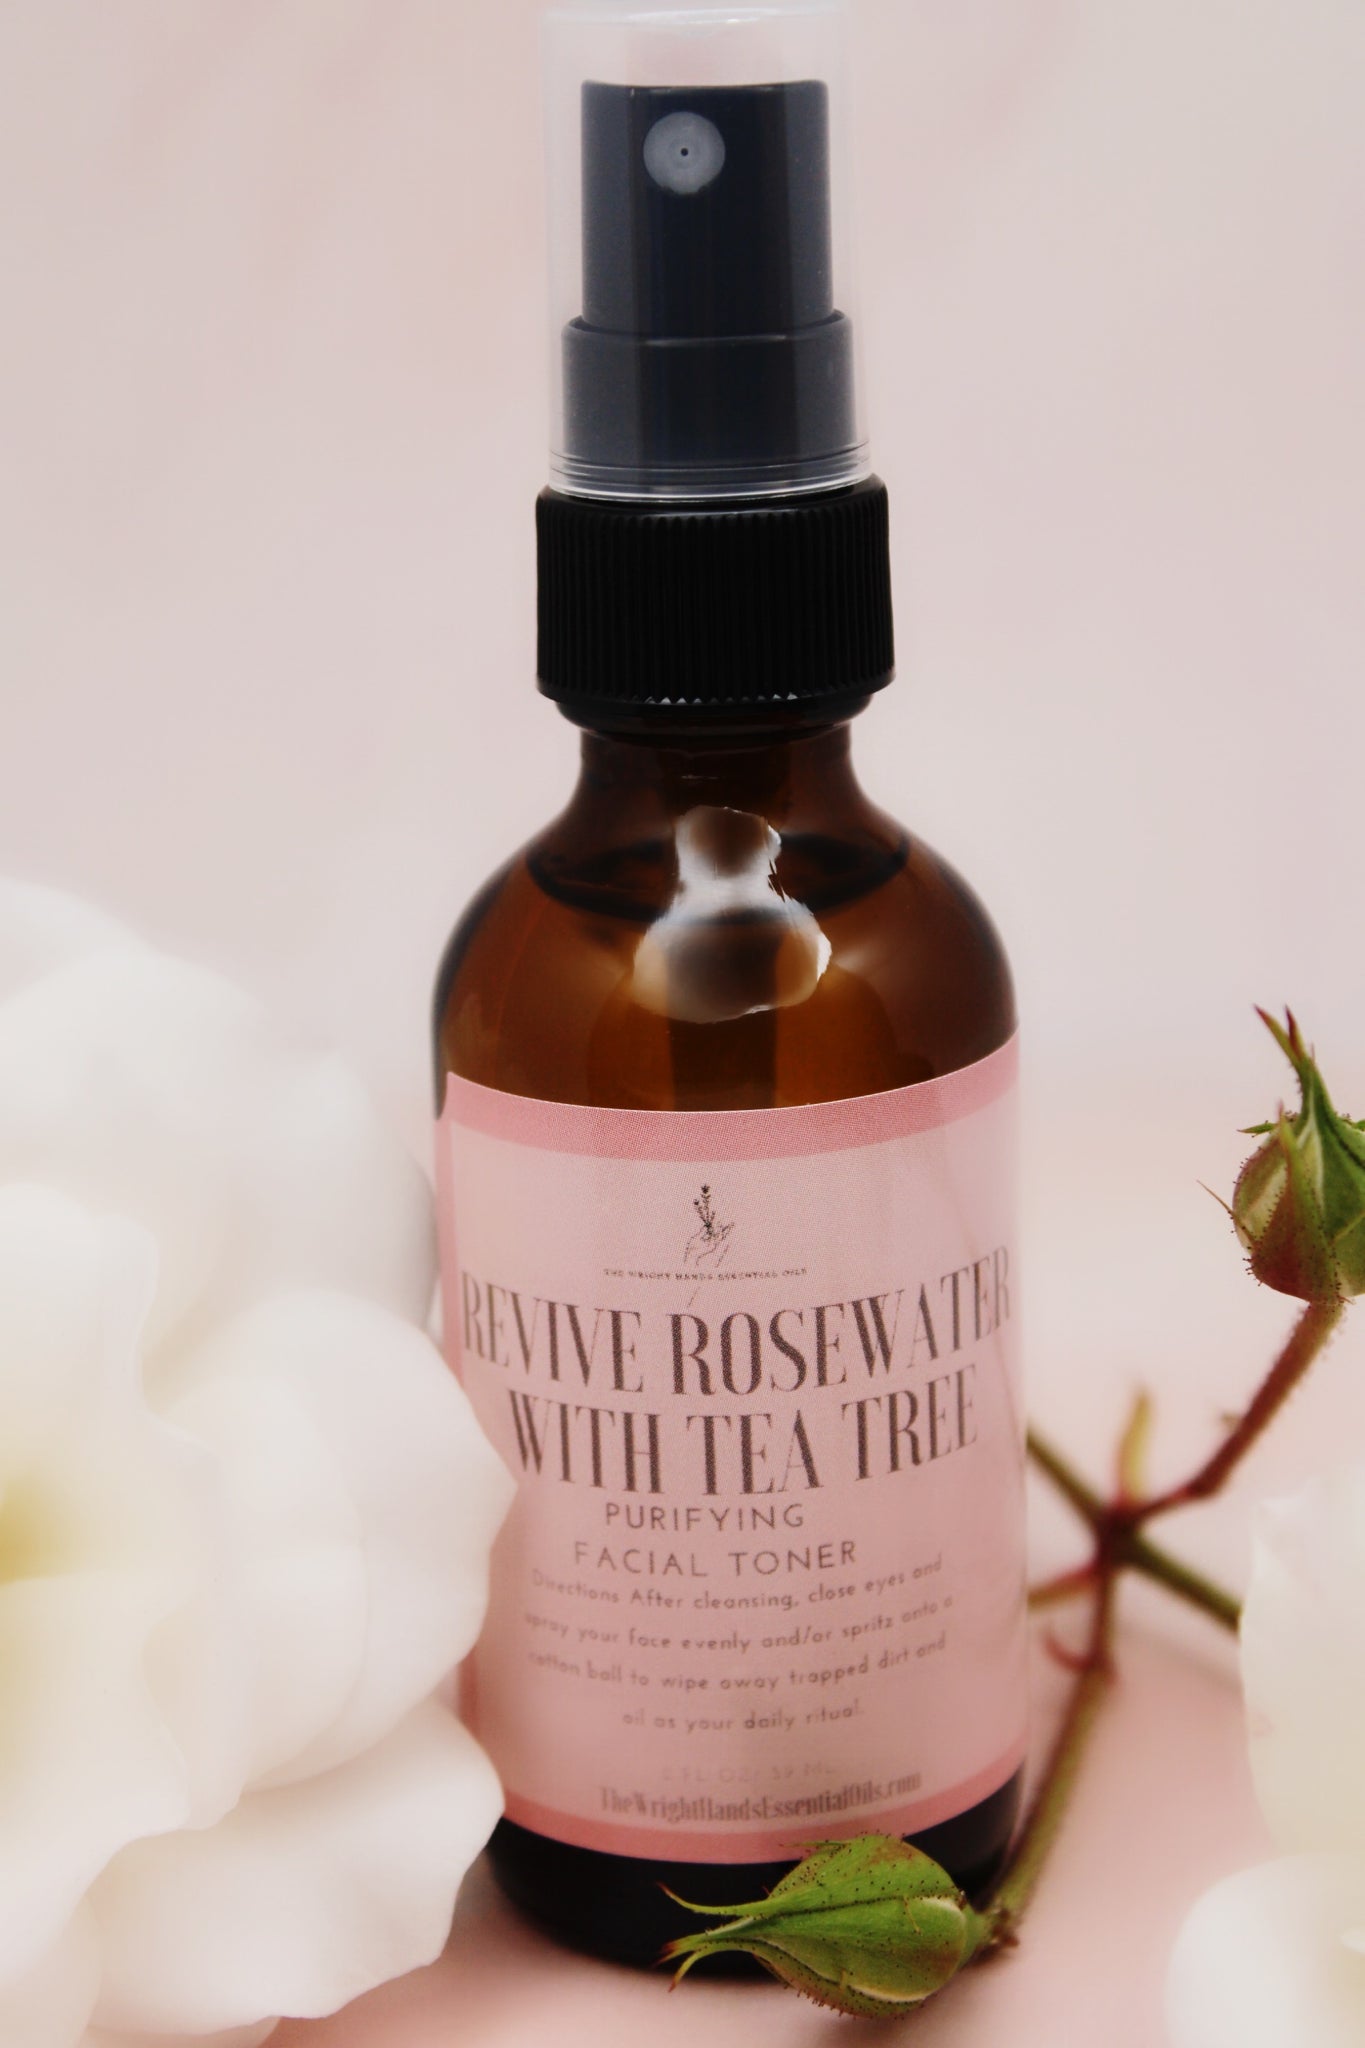 REVIVE ROSEWATER WITH TEA TREE - Purifying Facial Toner